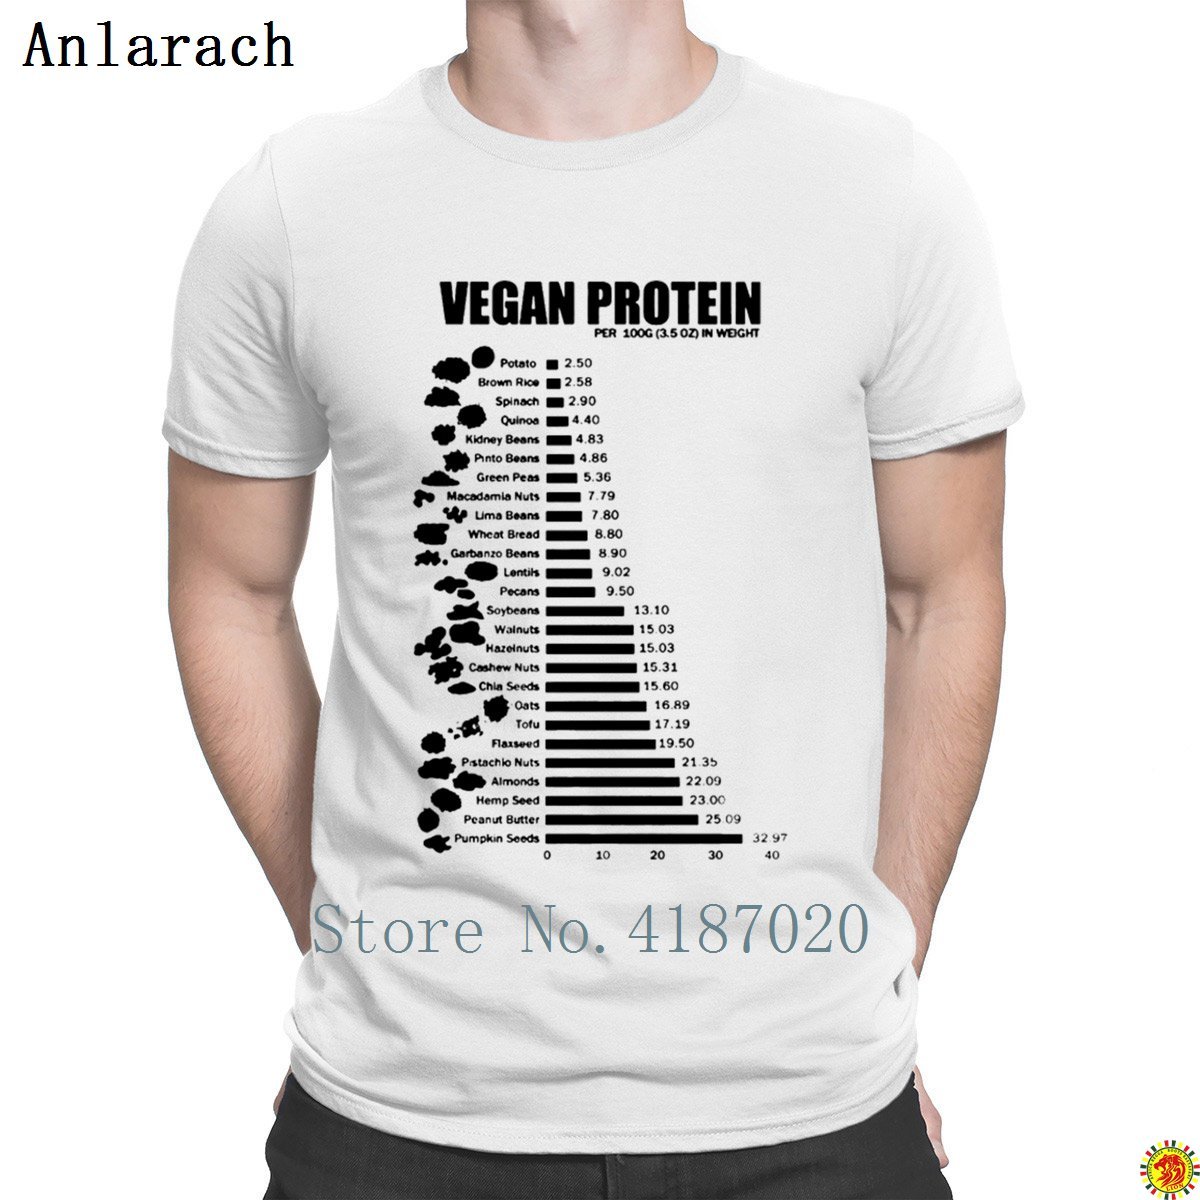 Vegan Protein T Shirts Anti Wrinkle Designs Novelty Pop Top Tee T Shirt For Men Slogan Euro Size Spring Autumn Anlarach Cool Tees Graphic T Shirt From Dzupright 16 15 Dhgate Com